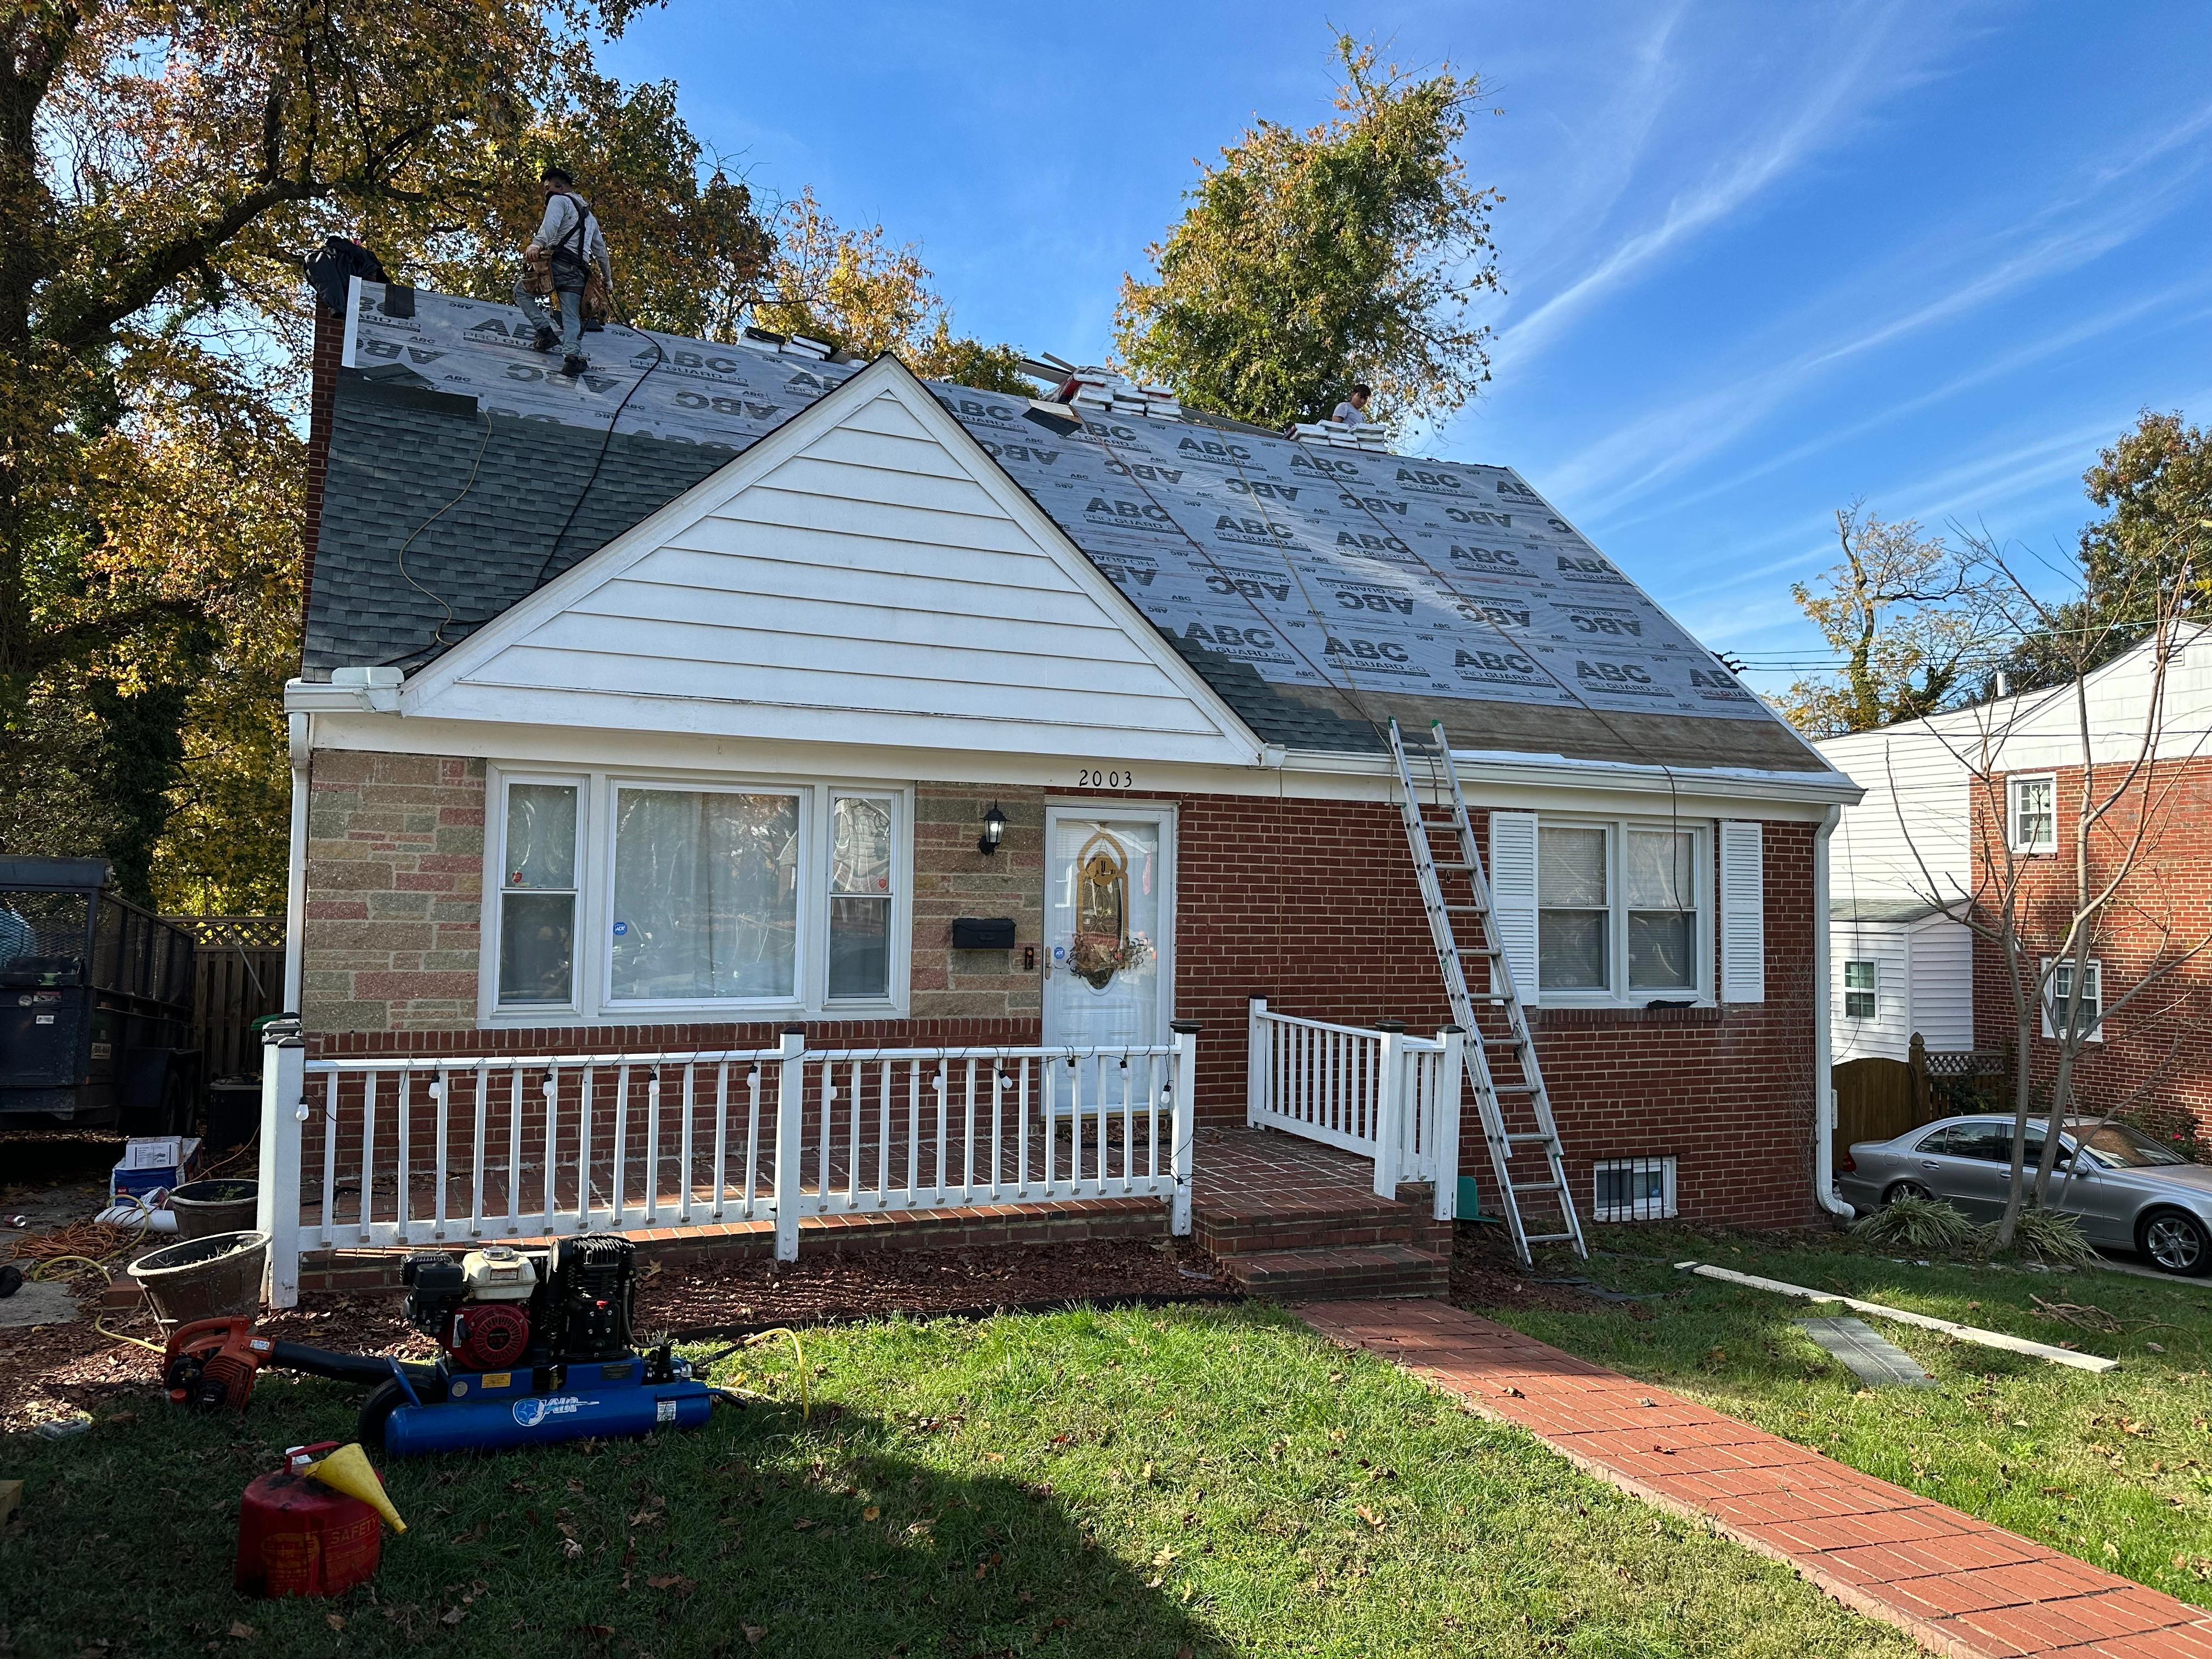 Replacing roof with Lifetime shingles!